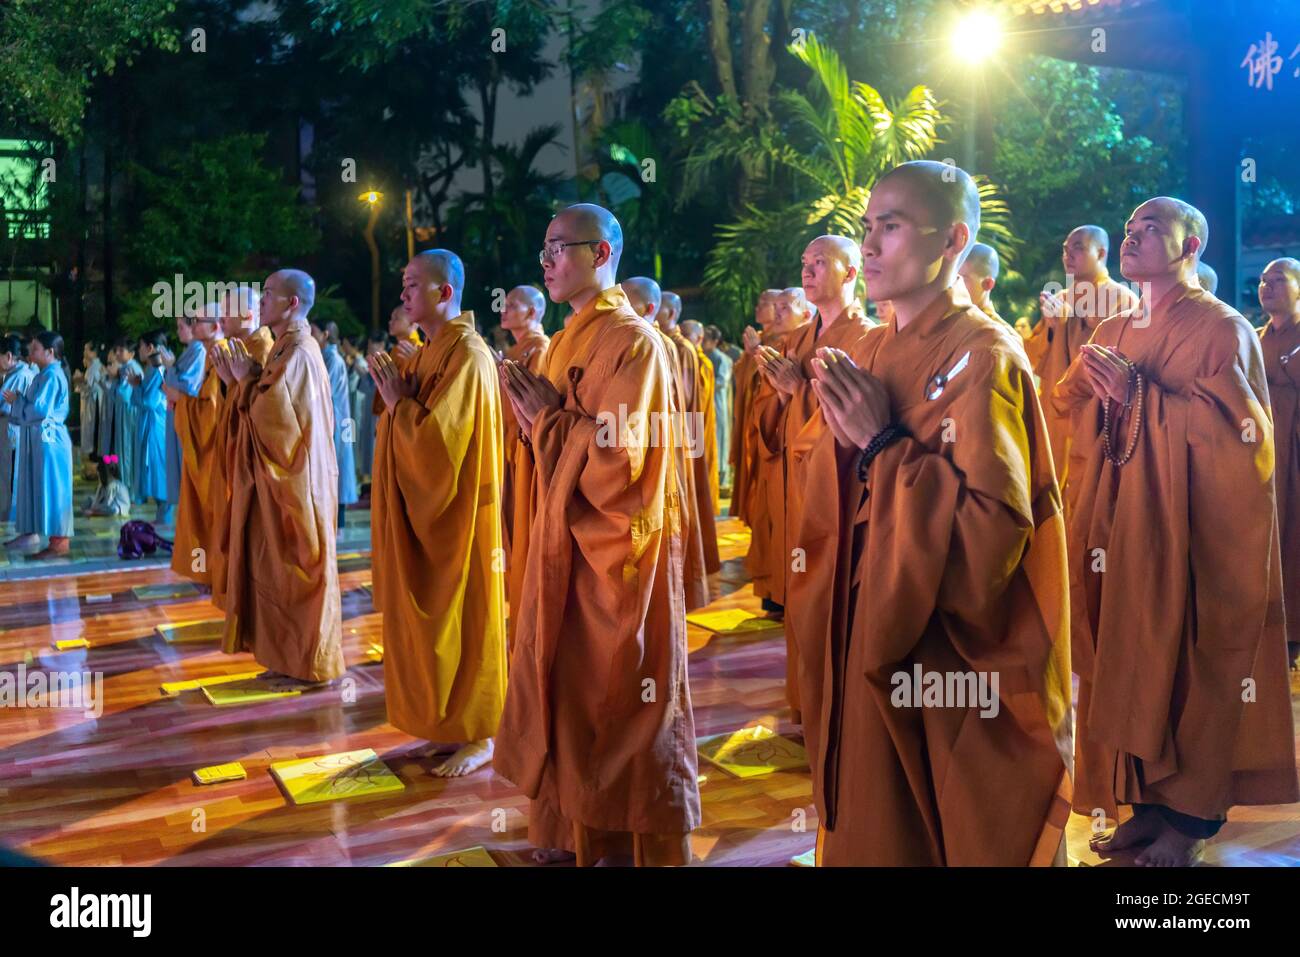 Monks are chanting prayers for peace during annual Amitabha Buddha ceremony held in evening at an ancient temple in Ho Chi Minh City, Vietnam Stock Photo